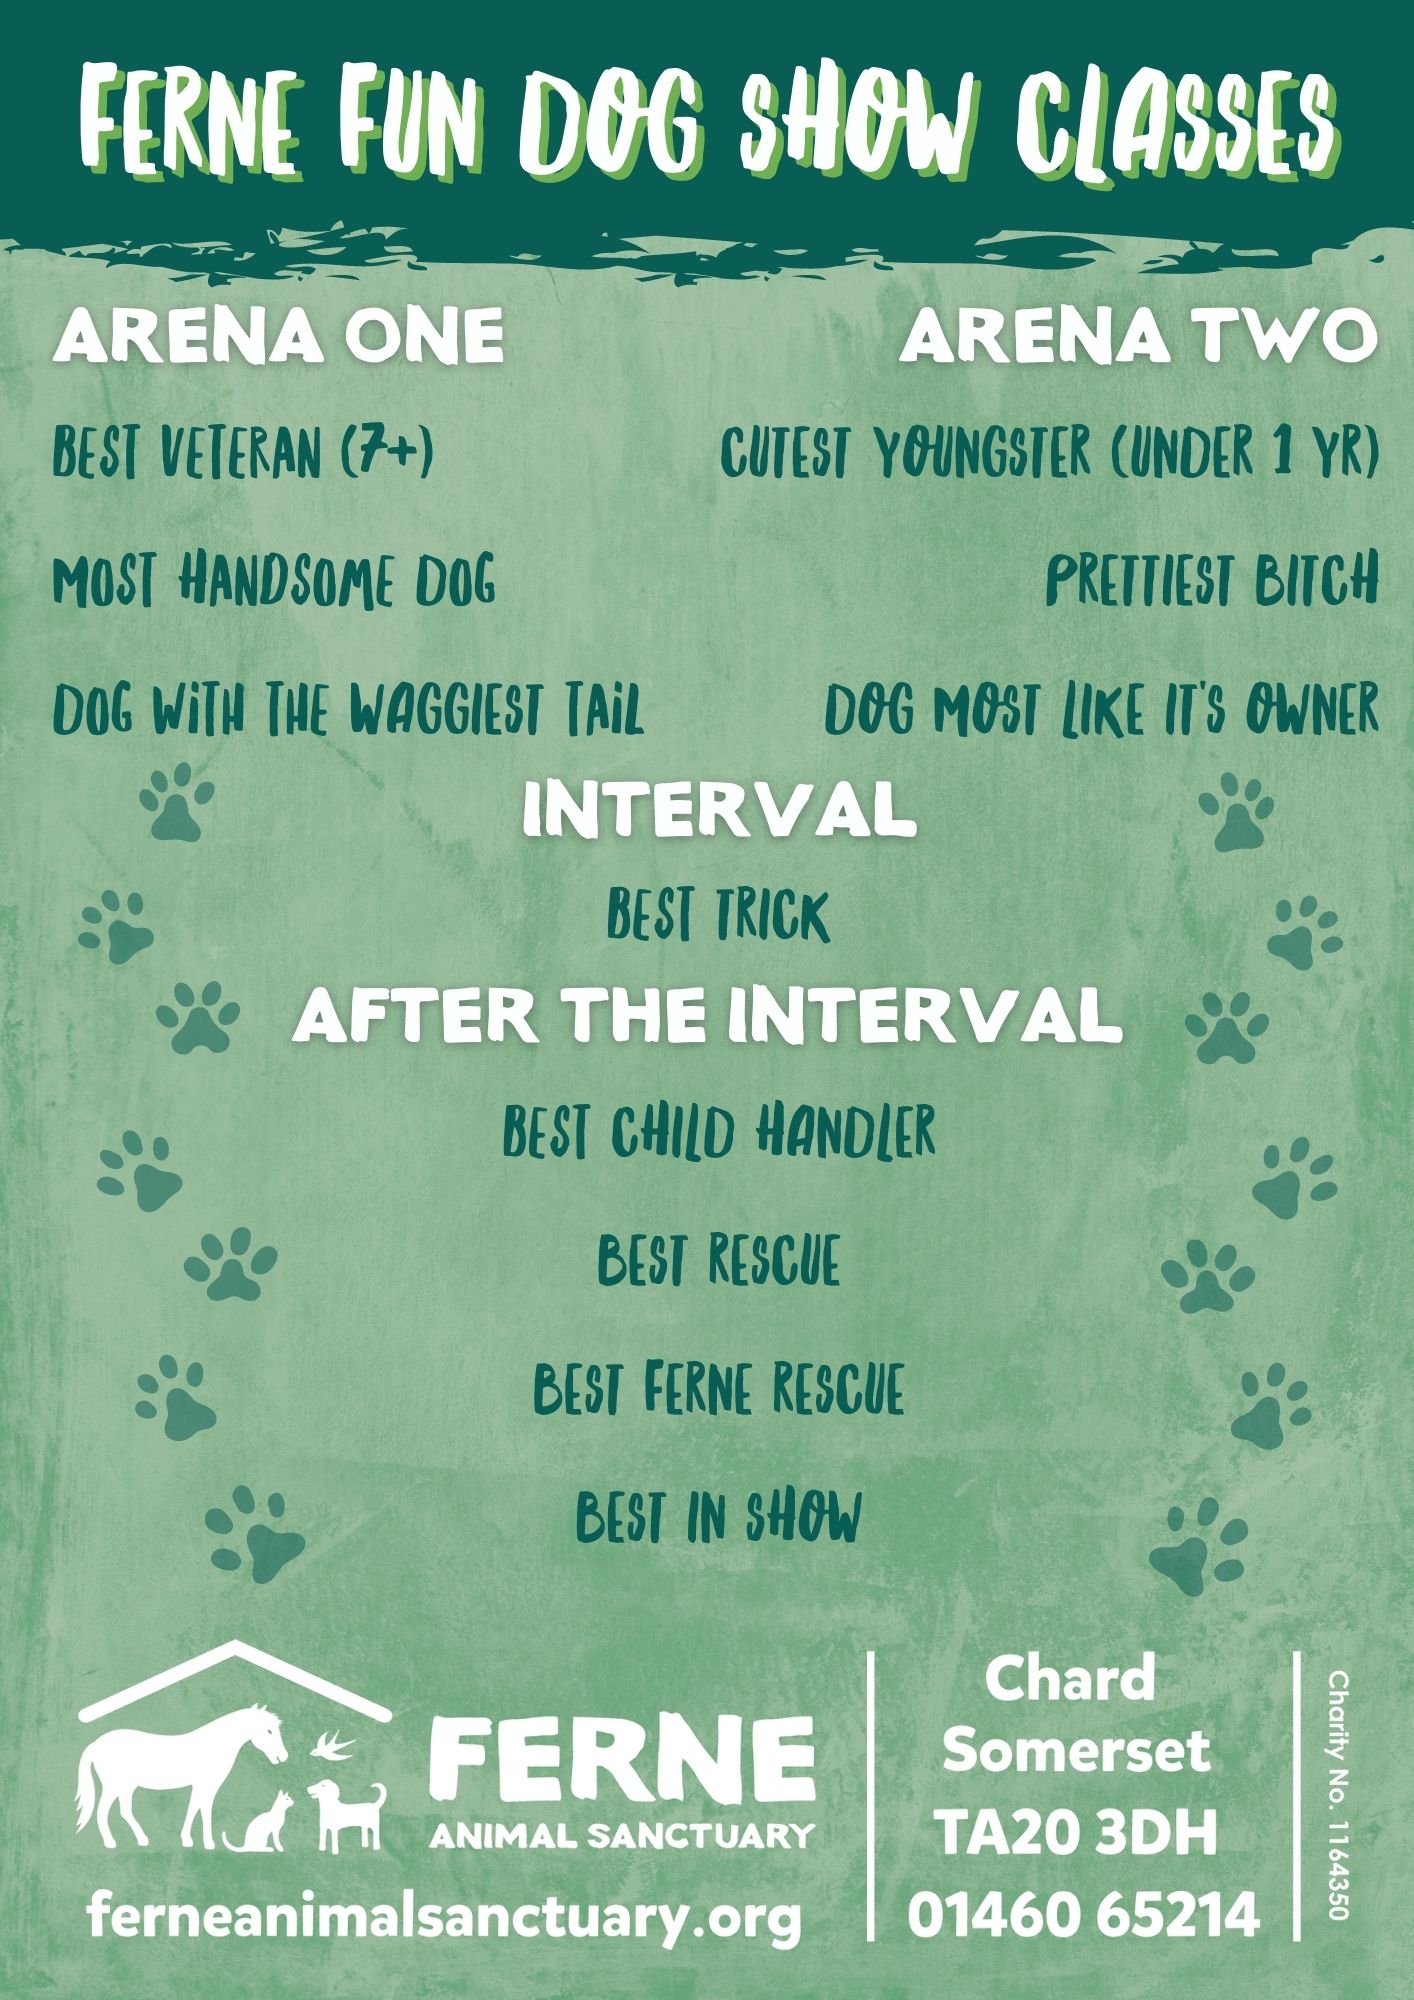 Our Ferne Fun Dog Show Classes!